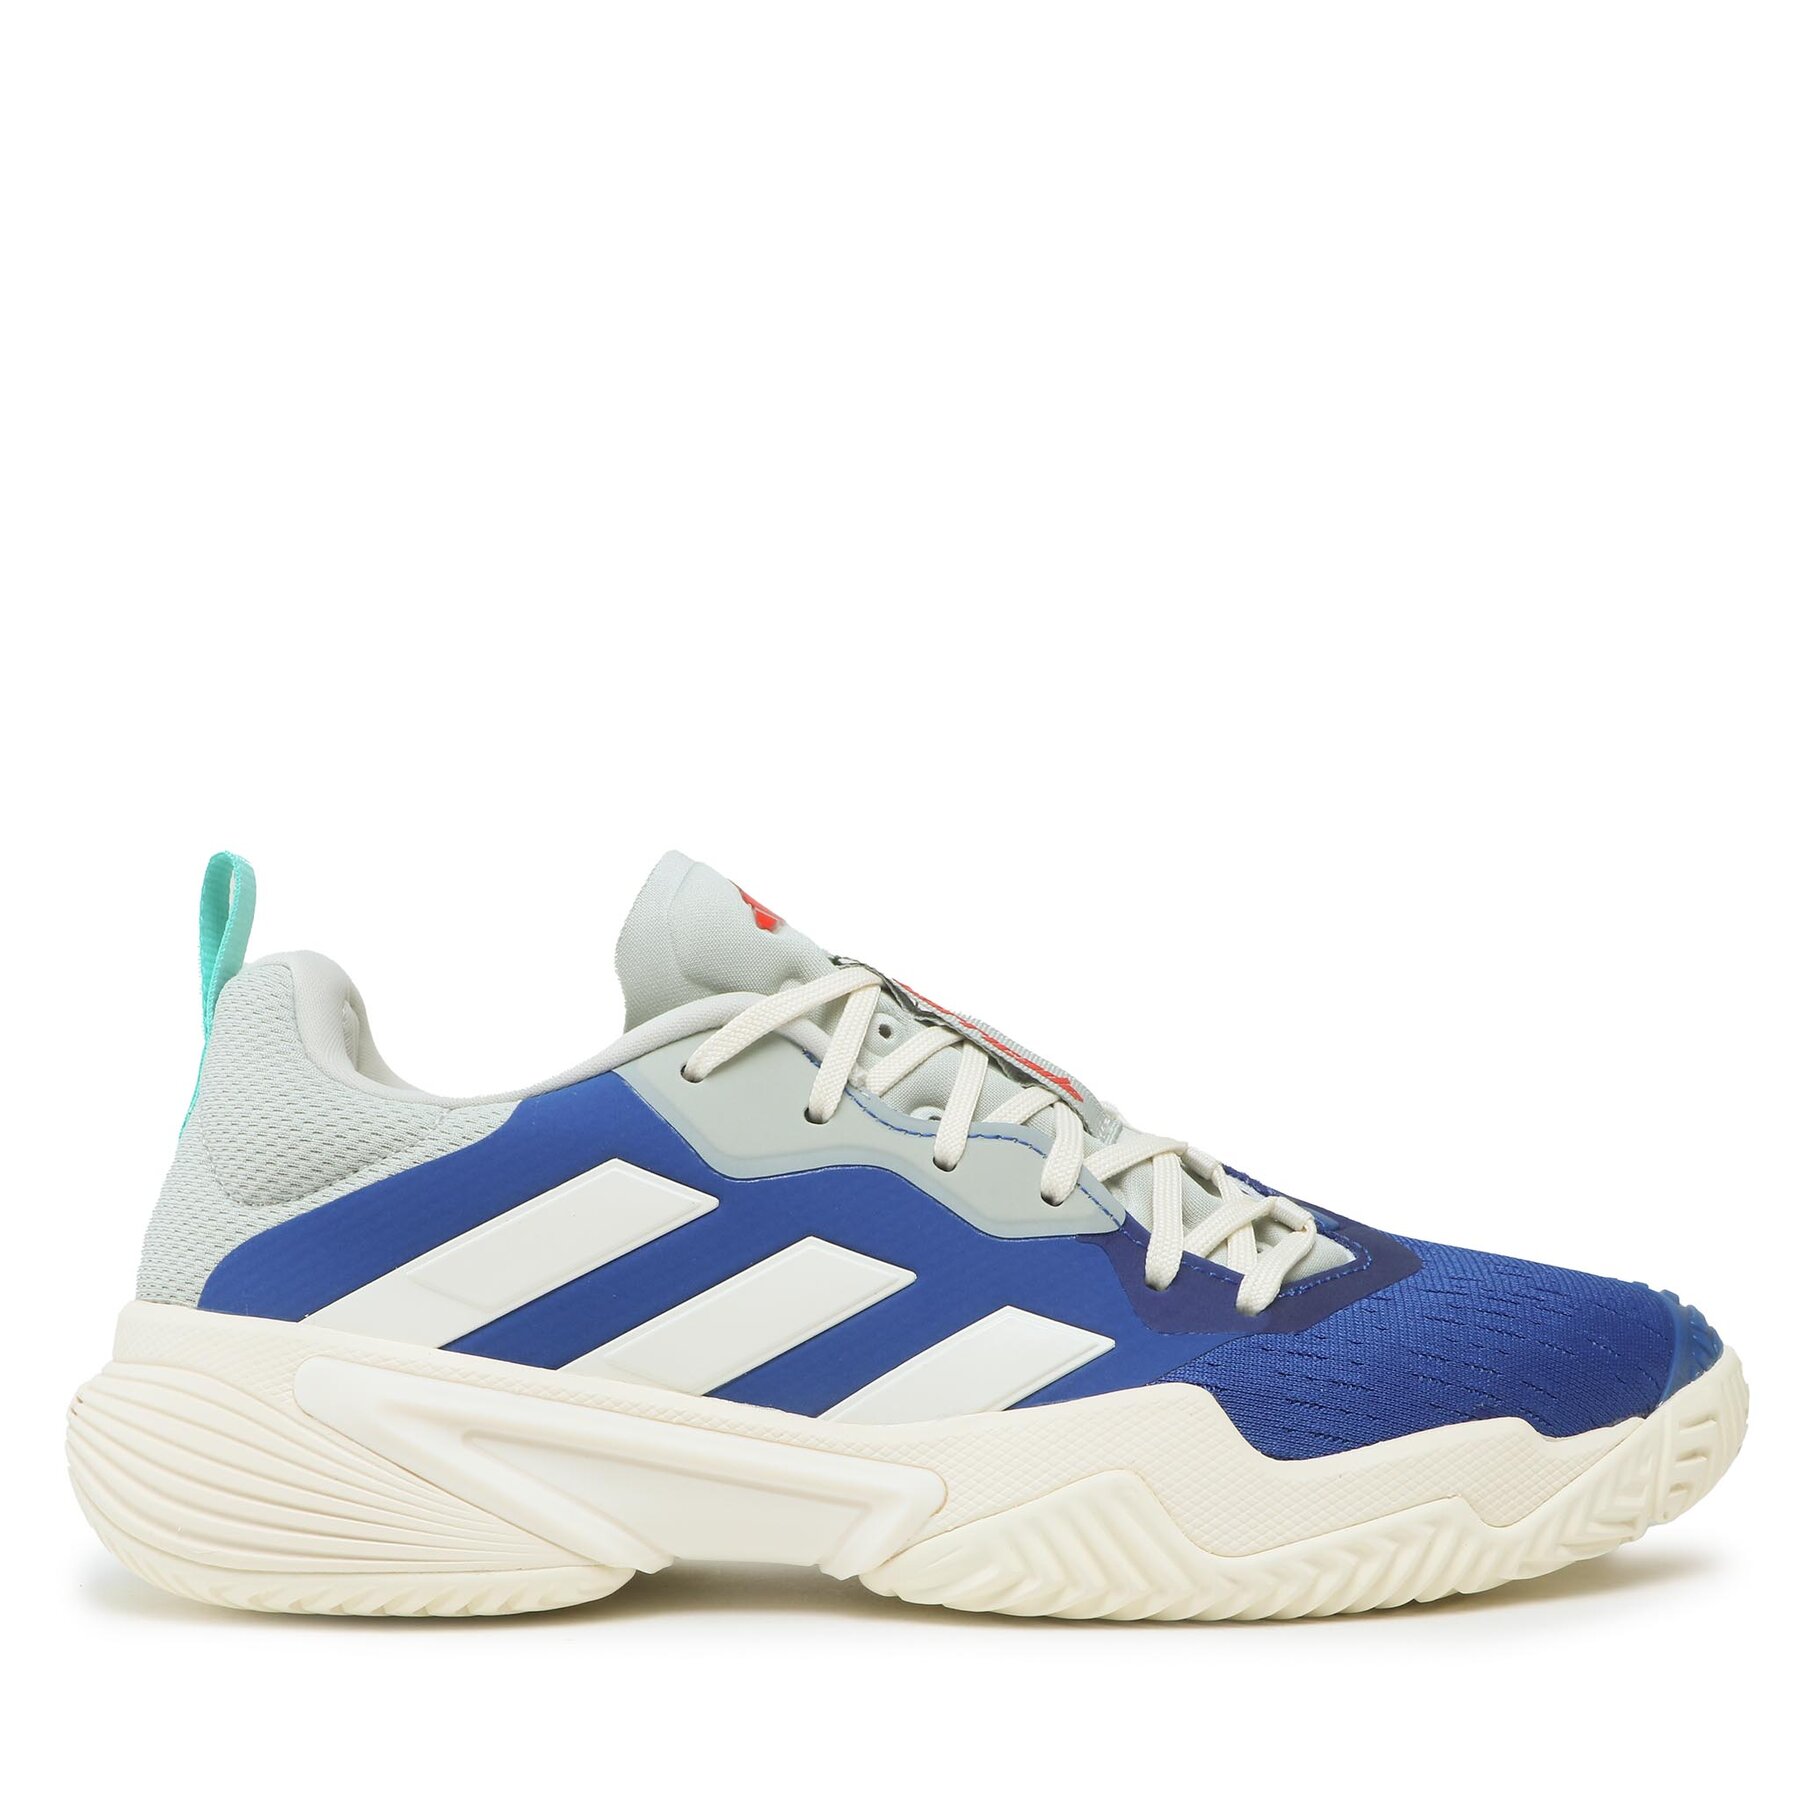 Adidas Barricade royal blue/off white/bright red